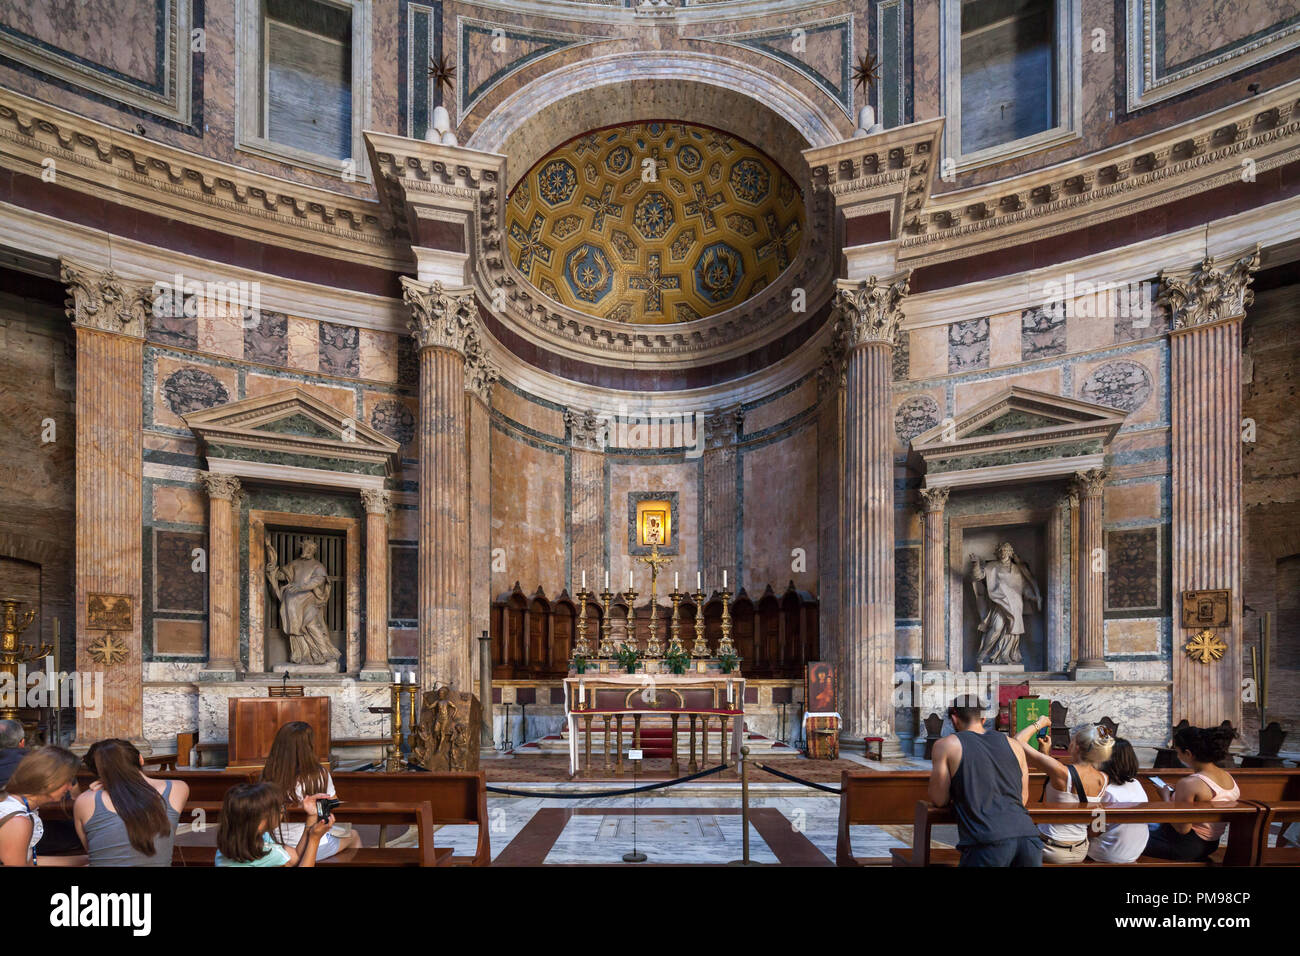 The High Altar, Pantheon, Rome, Italy Stock Photo